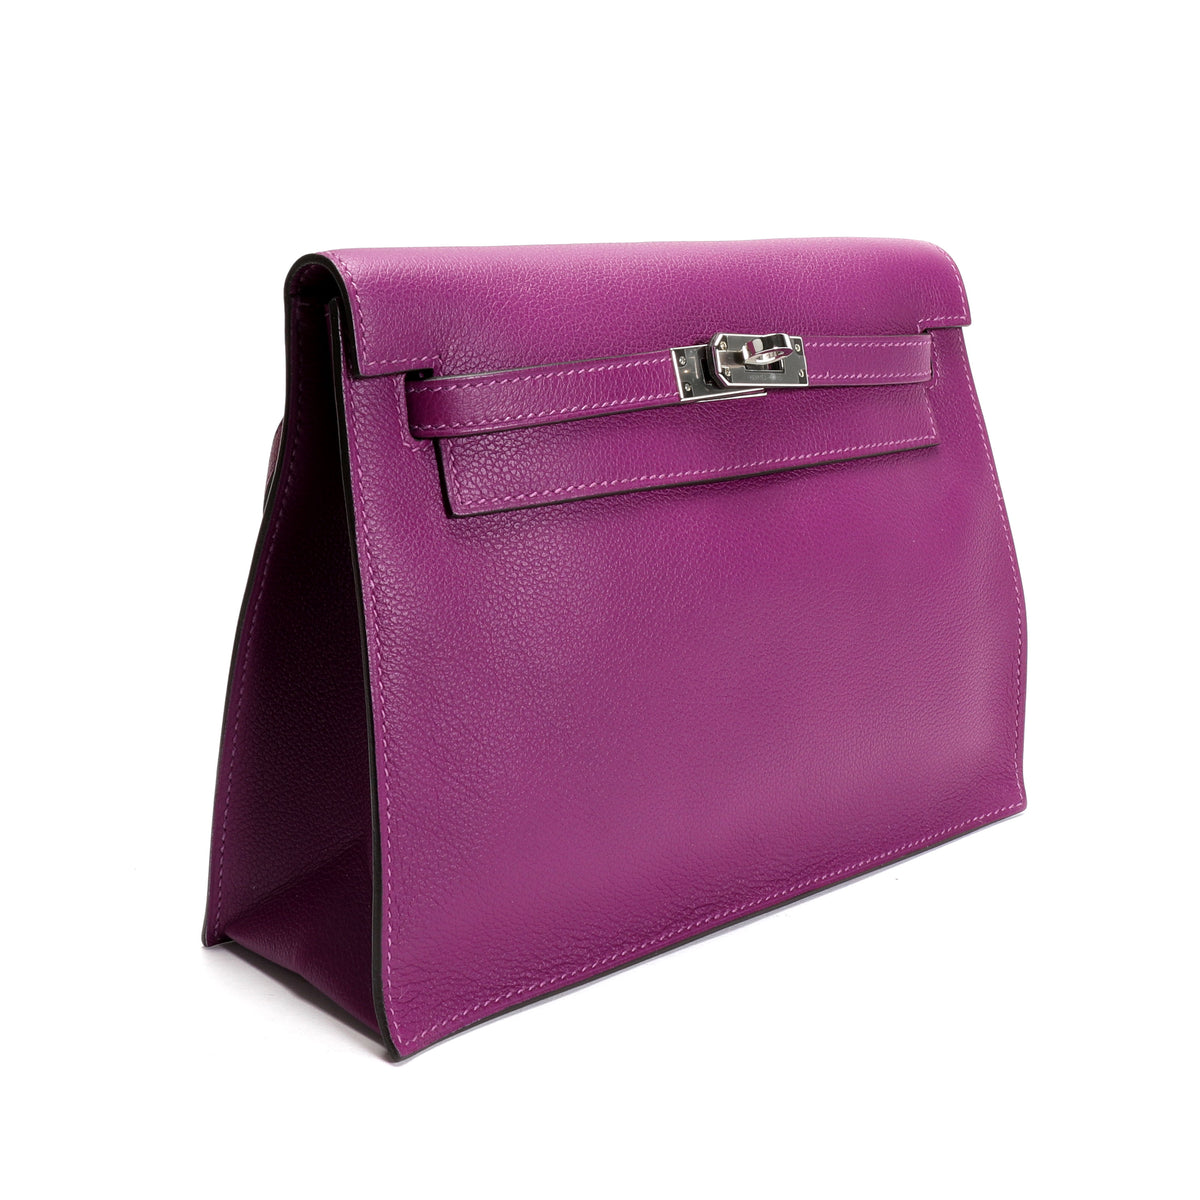 Hermès Anemone Kelly Danse II of Evercolor Leather with Palladium Hardware, Handbags & Accessories Online, Ecommerce Retail